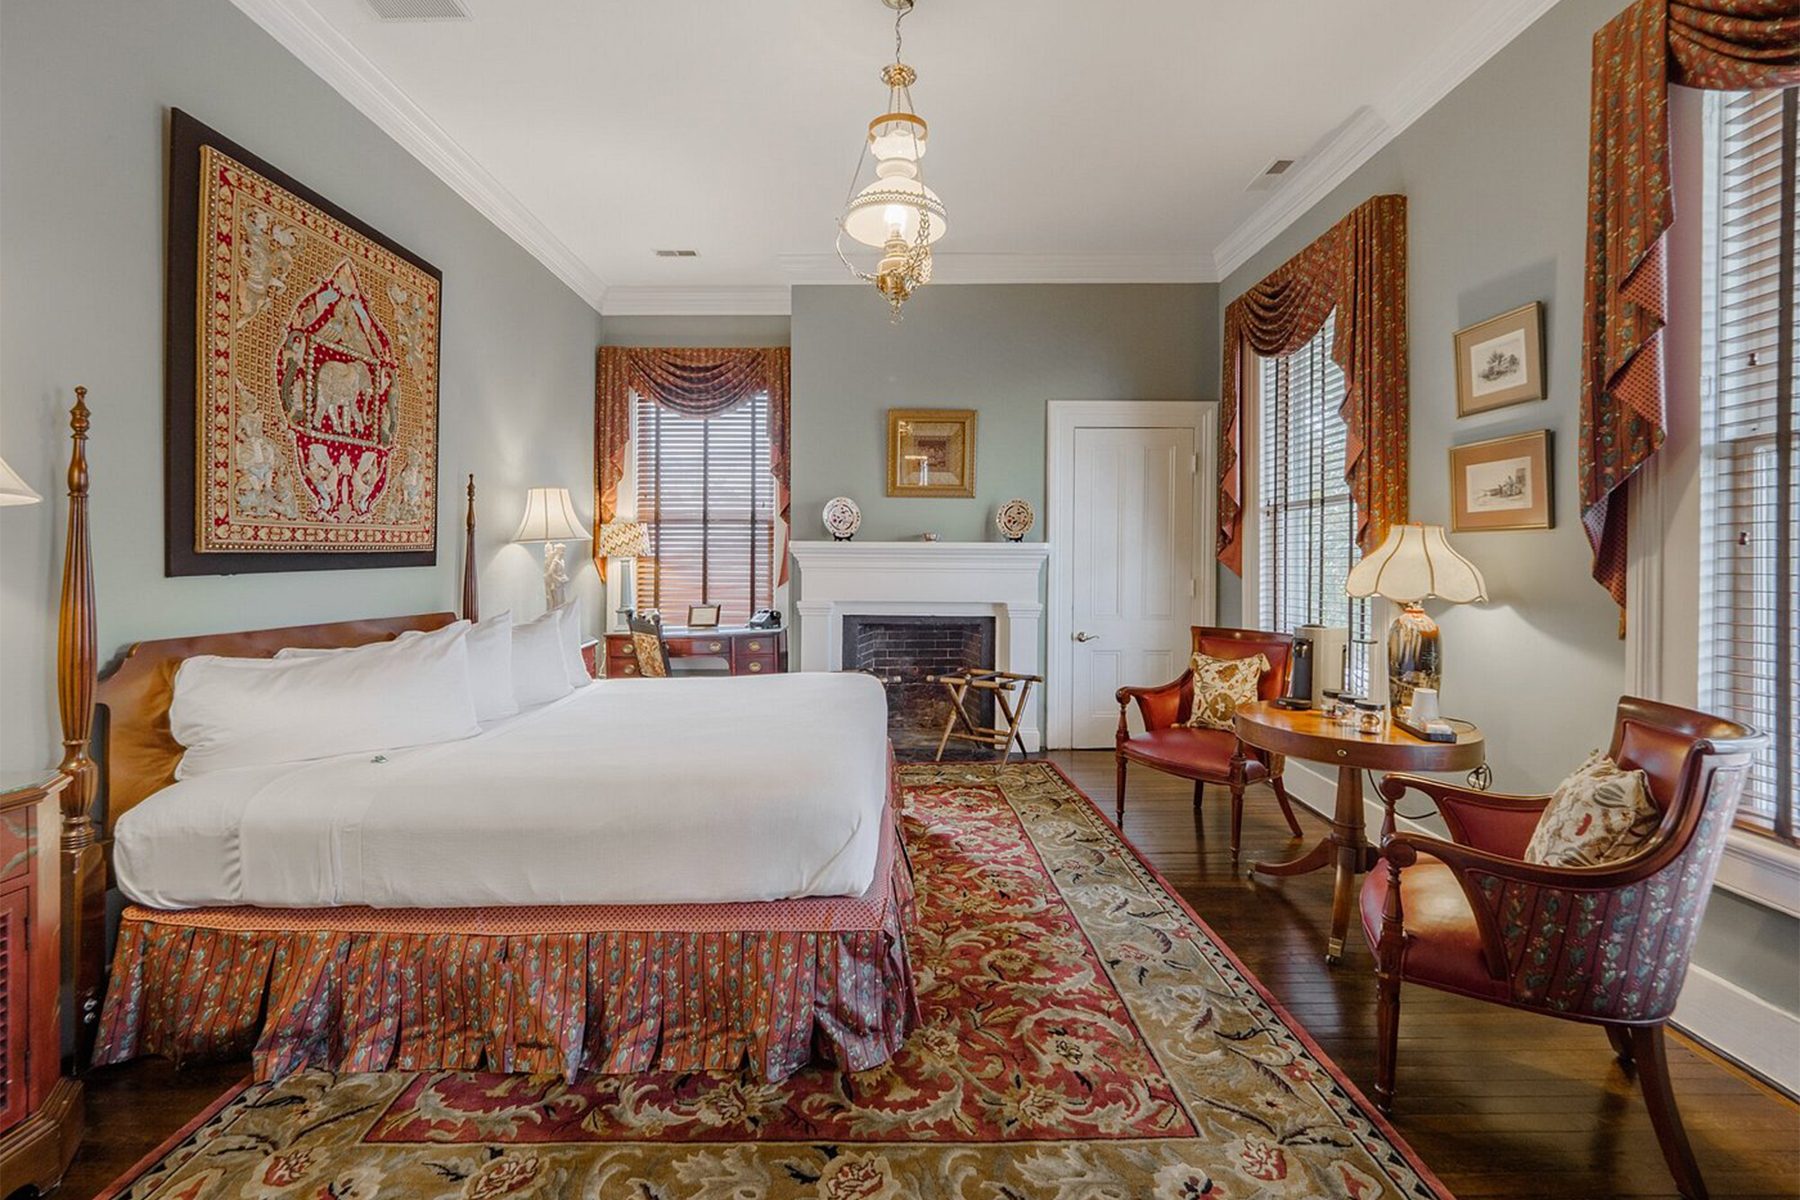 <h3 class="">Wilmington, North Carolina</h3> <p class=""><strong>Best for: </strong>An elegant couples getaway in a stately Southern mansion</p> <p>Lovingly restored by its previous owner, Chuck Pennington, and his partner, <a href="https://www.tripadvisor.com/Hotel_Review-g49673-d80734-Reviews-Verandas-Wilmington_North_Carolina.html" rel="noopener">Verandas</a> is a gorgeous bed-and-breakfast that exudes Southern elegance in the historic area of downtown Wilmington. Pennington filled the home with English and American antiques and many pieces of objet j'art, paintings and other furnishings that he found during his travels. He shared many stories with my husband and me about the property and his life when we visited years ago (including why he had the snake wine from Asia that I mentioned earlier). We enjoyed his company so much that we continued to stay in touch for many years after our visit.</p> <p>The eight elegantly appointed guest rooms feature queen- or king-size four-poster or sleigh beds, marble bathrooms with large oval tubs, and state-of-the-art climate controls. Cozy public spaces include two parlors, four verandas, a screened-in porch and a garden terrace.</p> <p>Hearty gourmet breakfasts made with locally sourced ingredients are a real treat—especially since they're served in the formal dining room on antique china and with vintage silverware. And with the gracious Southern hospitality, you'll feel like you've been invited as a guest to stay in someone's beautiful home for a <a href="https://www.rd.com/list/best-weekend-getaways-in-every-state/">weekend getaway</a>.</p> <p><strong>Pros: </strong></p> <ul> <li class="">Elegant decor with special touches and personal items</li> <li class="">Scrumptious daily breakfast</li> <li class="">Quiet and relaxing atmosphere</li> <li class="">Located just two blocks from the Cape Fear River</li> </ul> <p><strong>Cons:</strong></p> <ul> <li class="">Non-accessible property that doesn't have an elevator</li> <li class="">Geared toward adults, with no children under 12 permitted</li> </ul> <p class="listicle-page__cta-button-shop"><a class="shop-btn" href="https://www.tripadvisor.com/Hotel_Review-g49673-d80734-Reviews-Verandas-Wilmington_North_Carolina.html">Book Now</a></p>